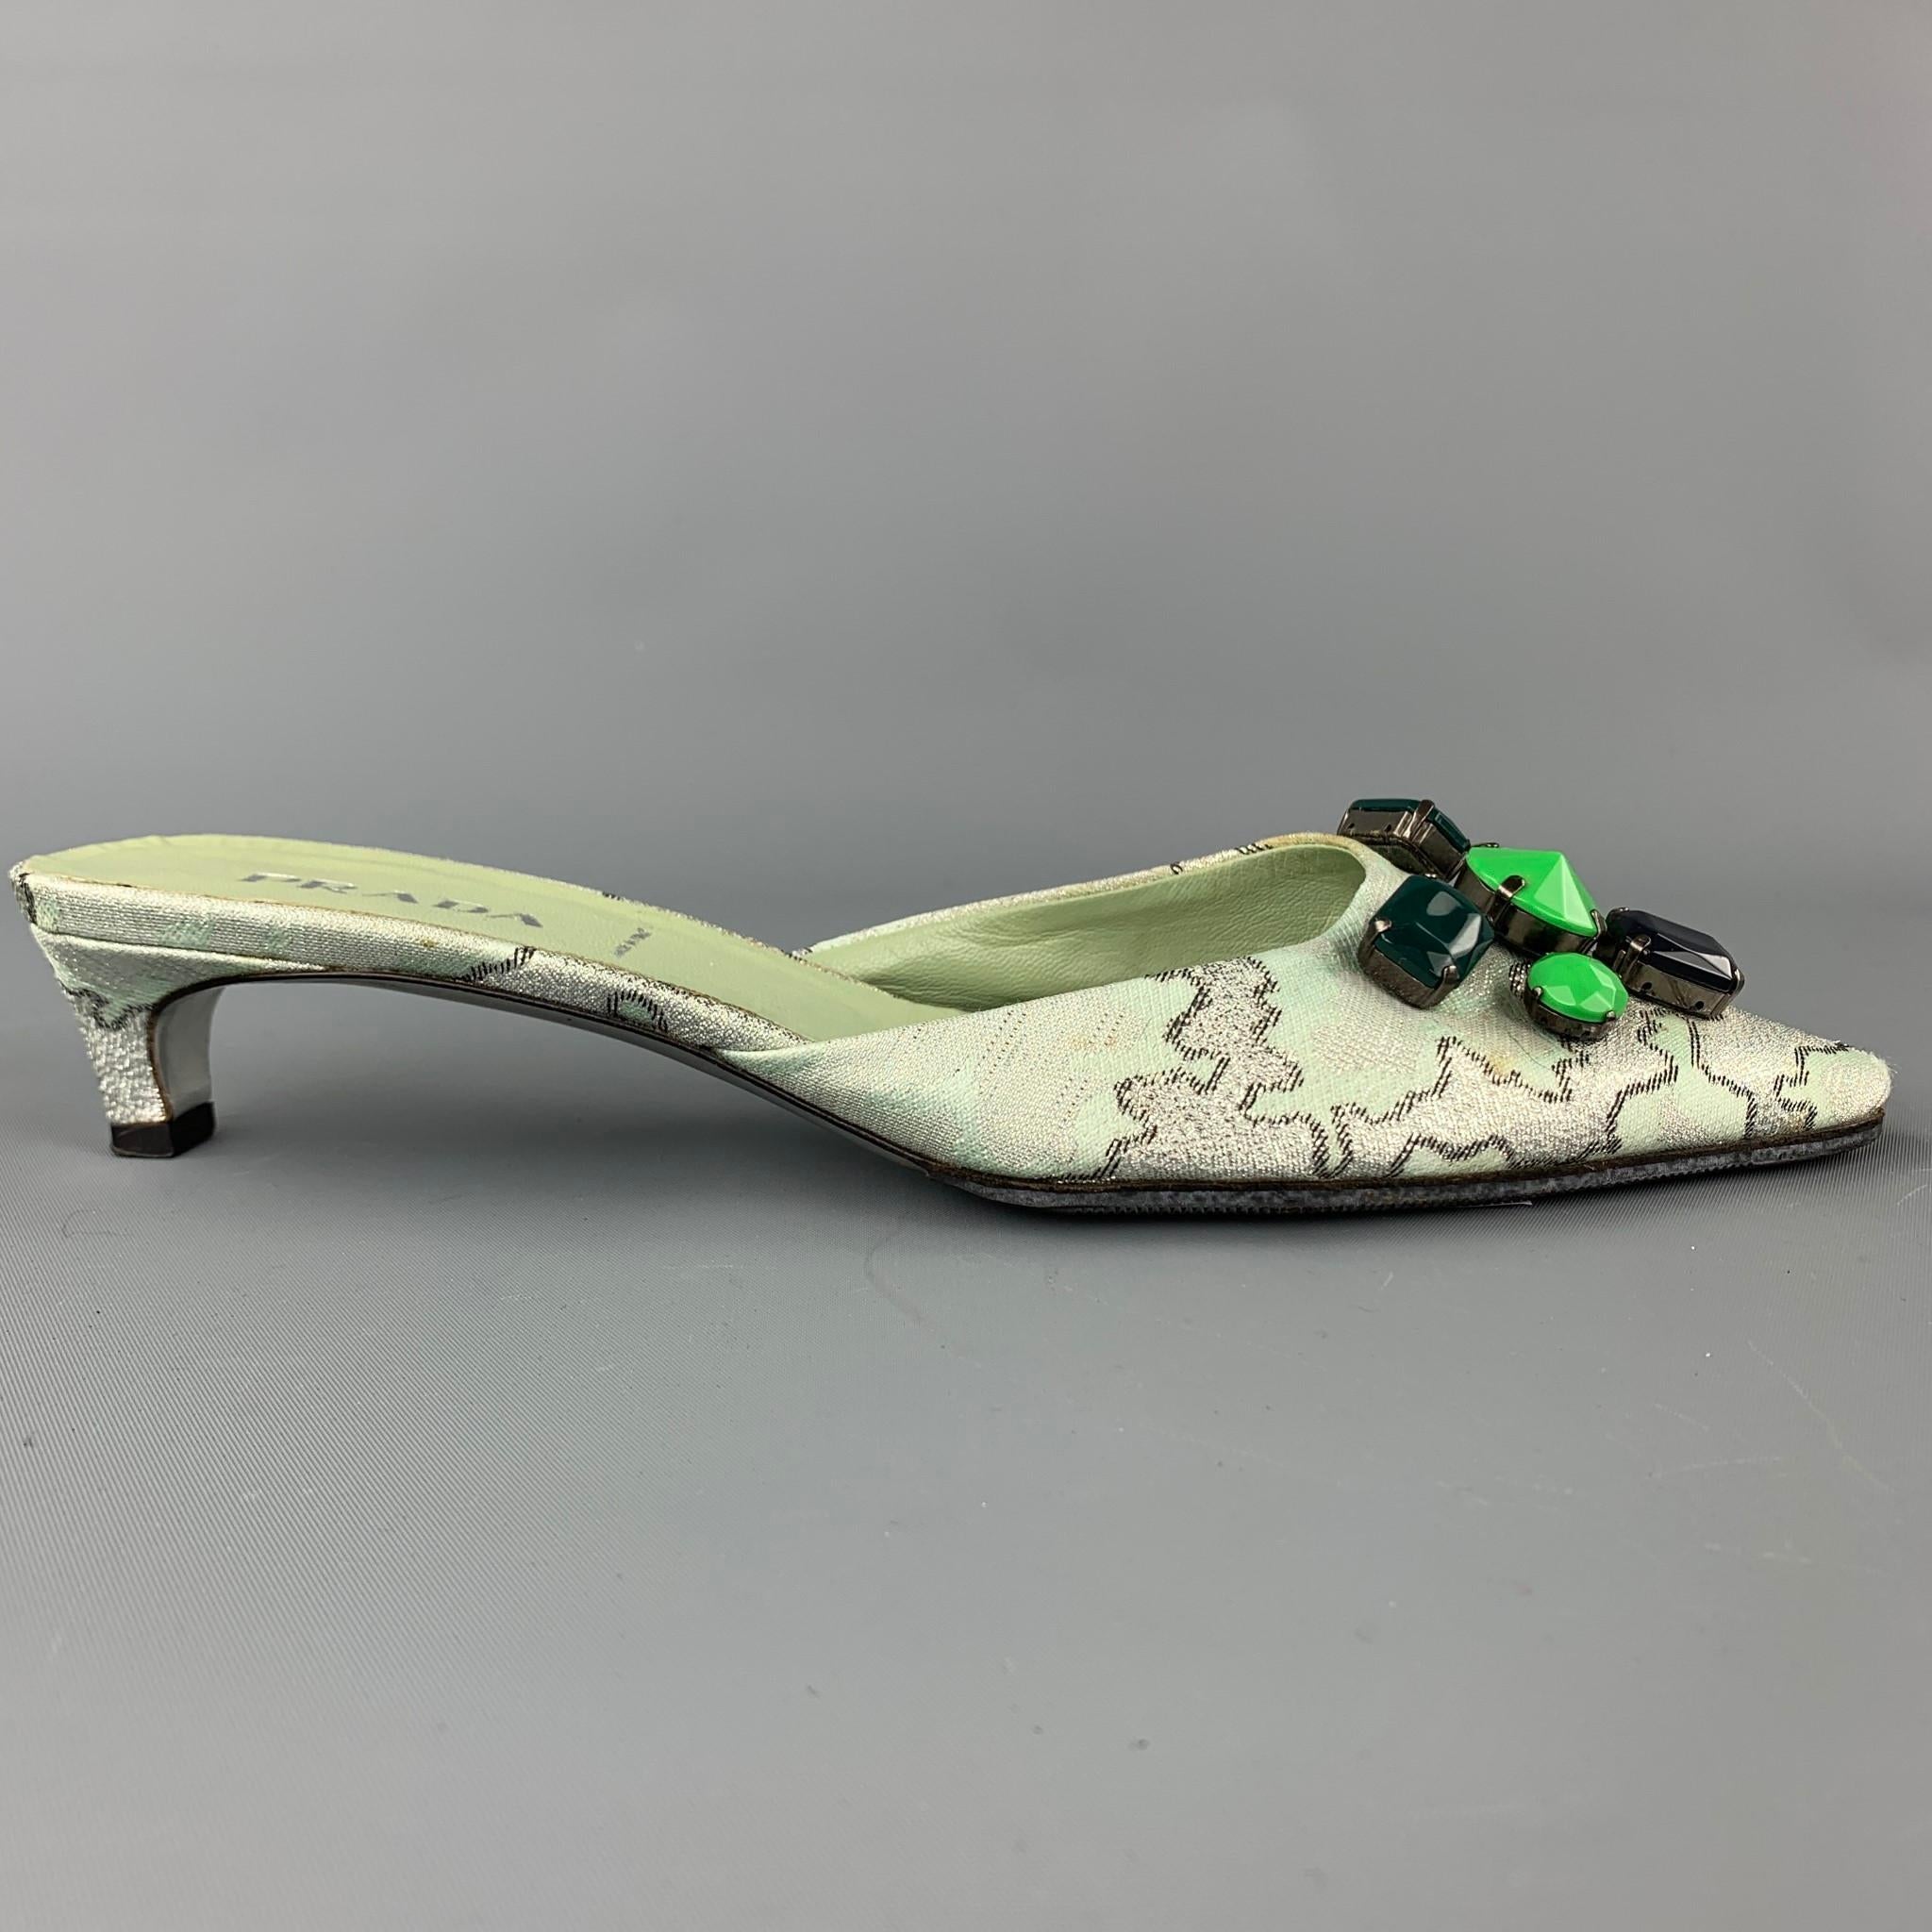 PRADA pumps comes in a green print silk with front embellishment details featuring a mule style, pointed toe, and a kitten heel. Moderate wear. Made in Italy.

Good Pre-Owned Condition.
Marked: EU 38.5

Measurements:

Heel: 2 in. 